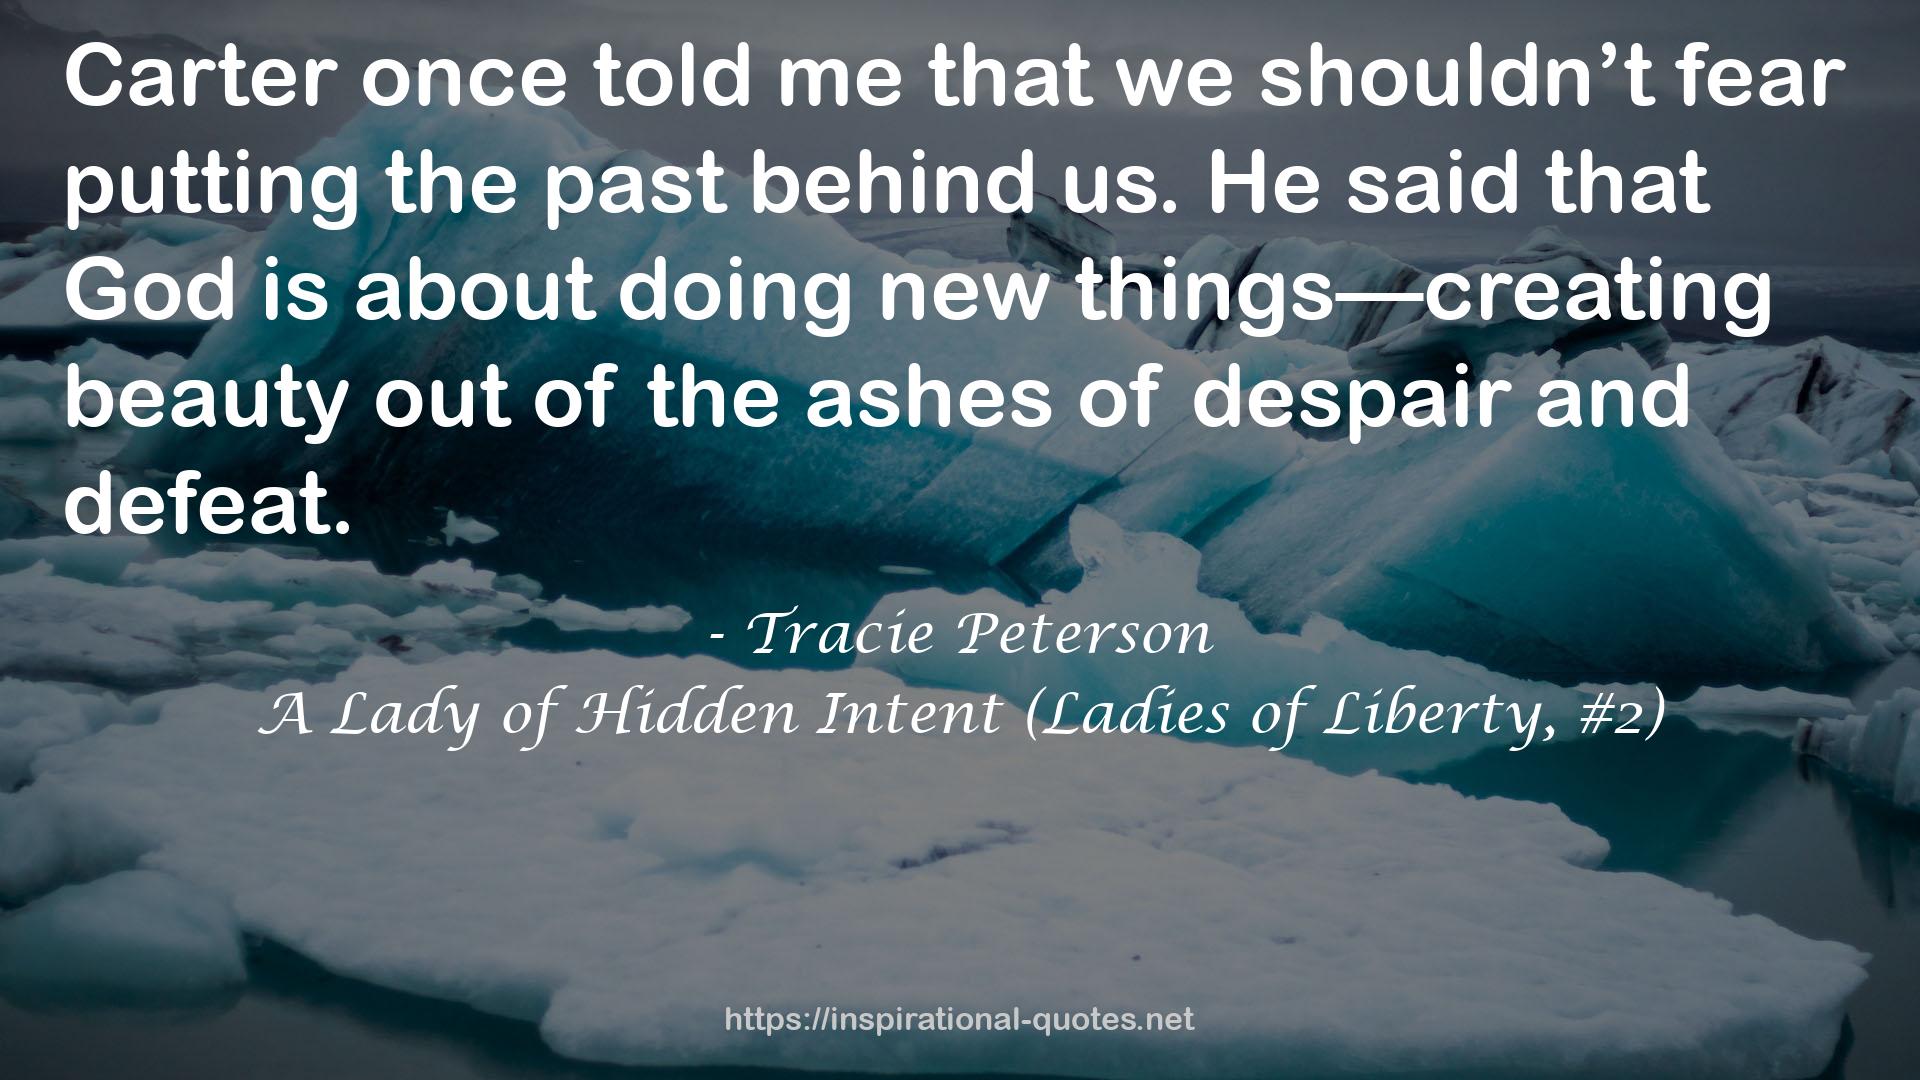 A Lady of Hidden Intent (Ladies of Liberty, #2) QUOTES